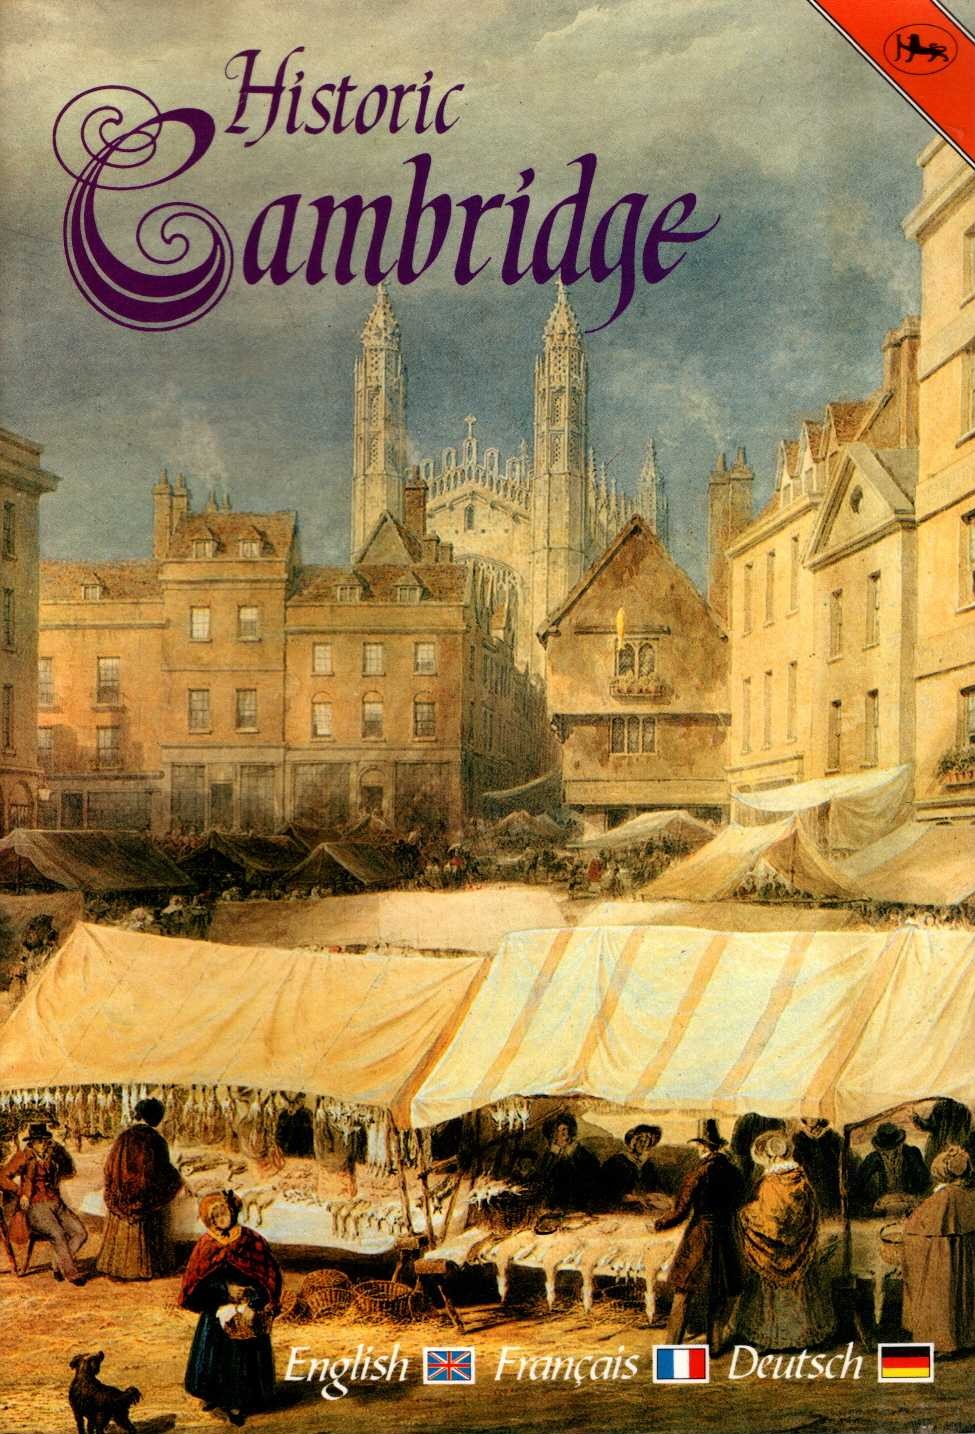 \ HISTORIC CAMBRIDGE by John Brookes front book cover image